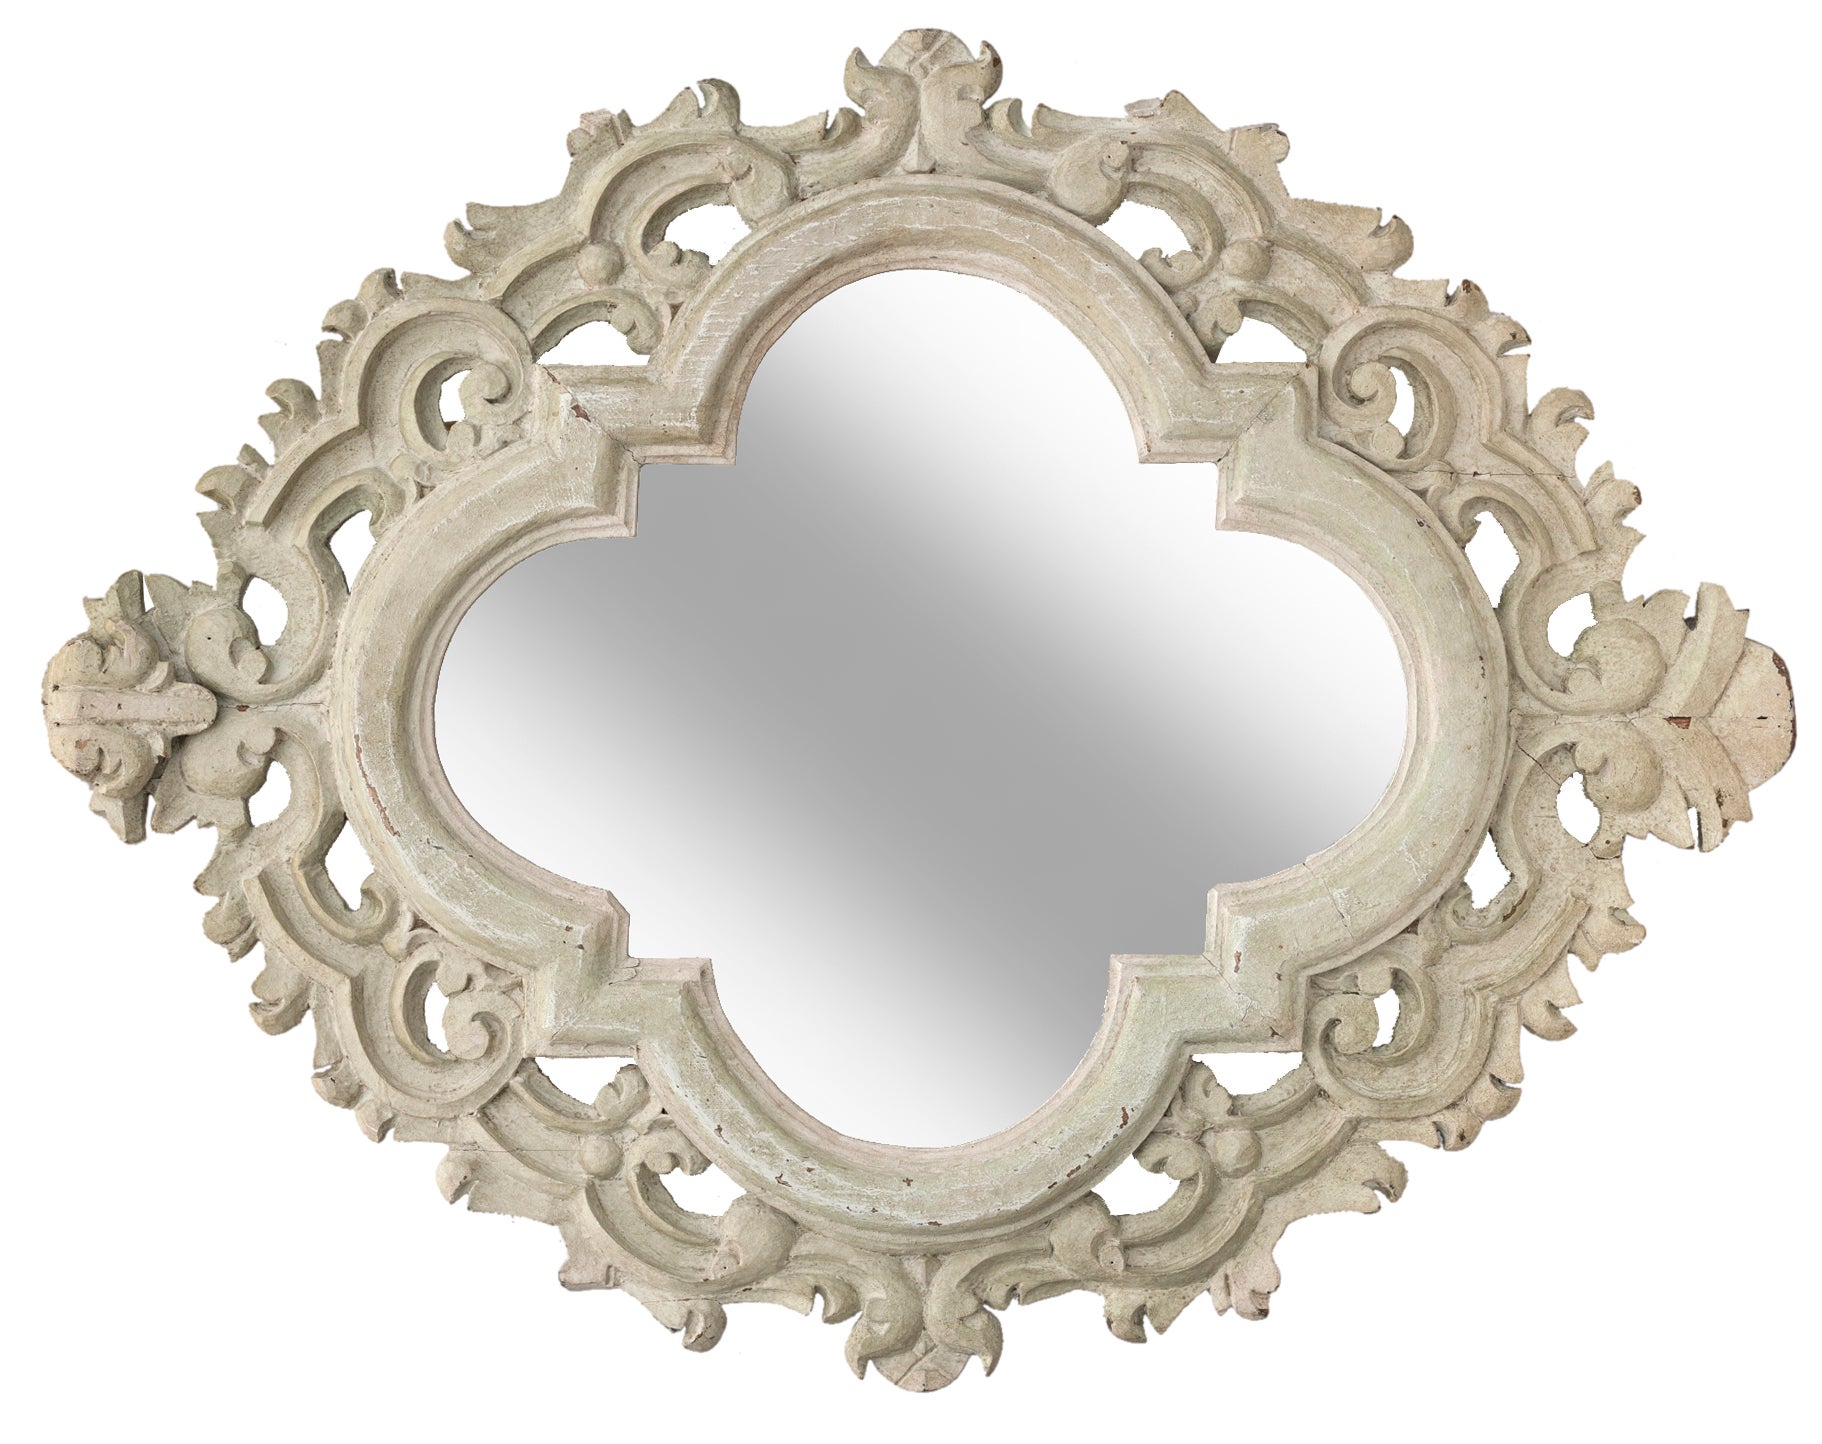 Large Italian Hand-carved Ornate Mirror